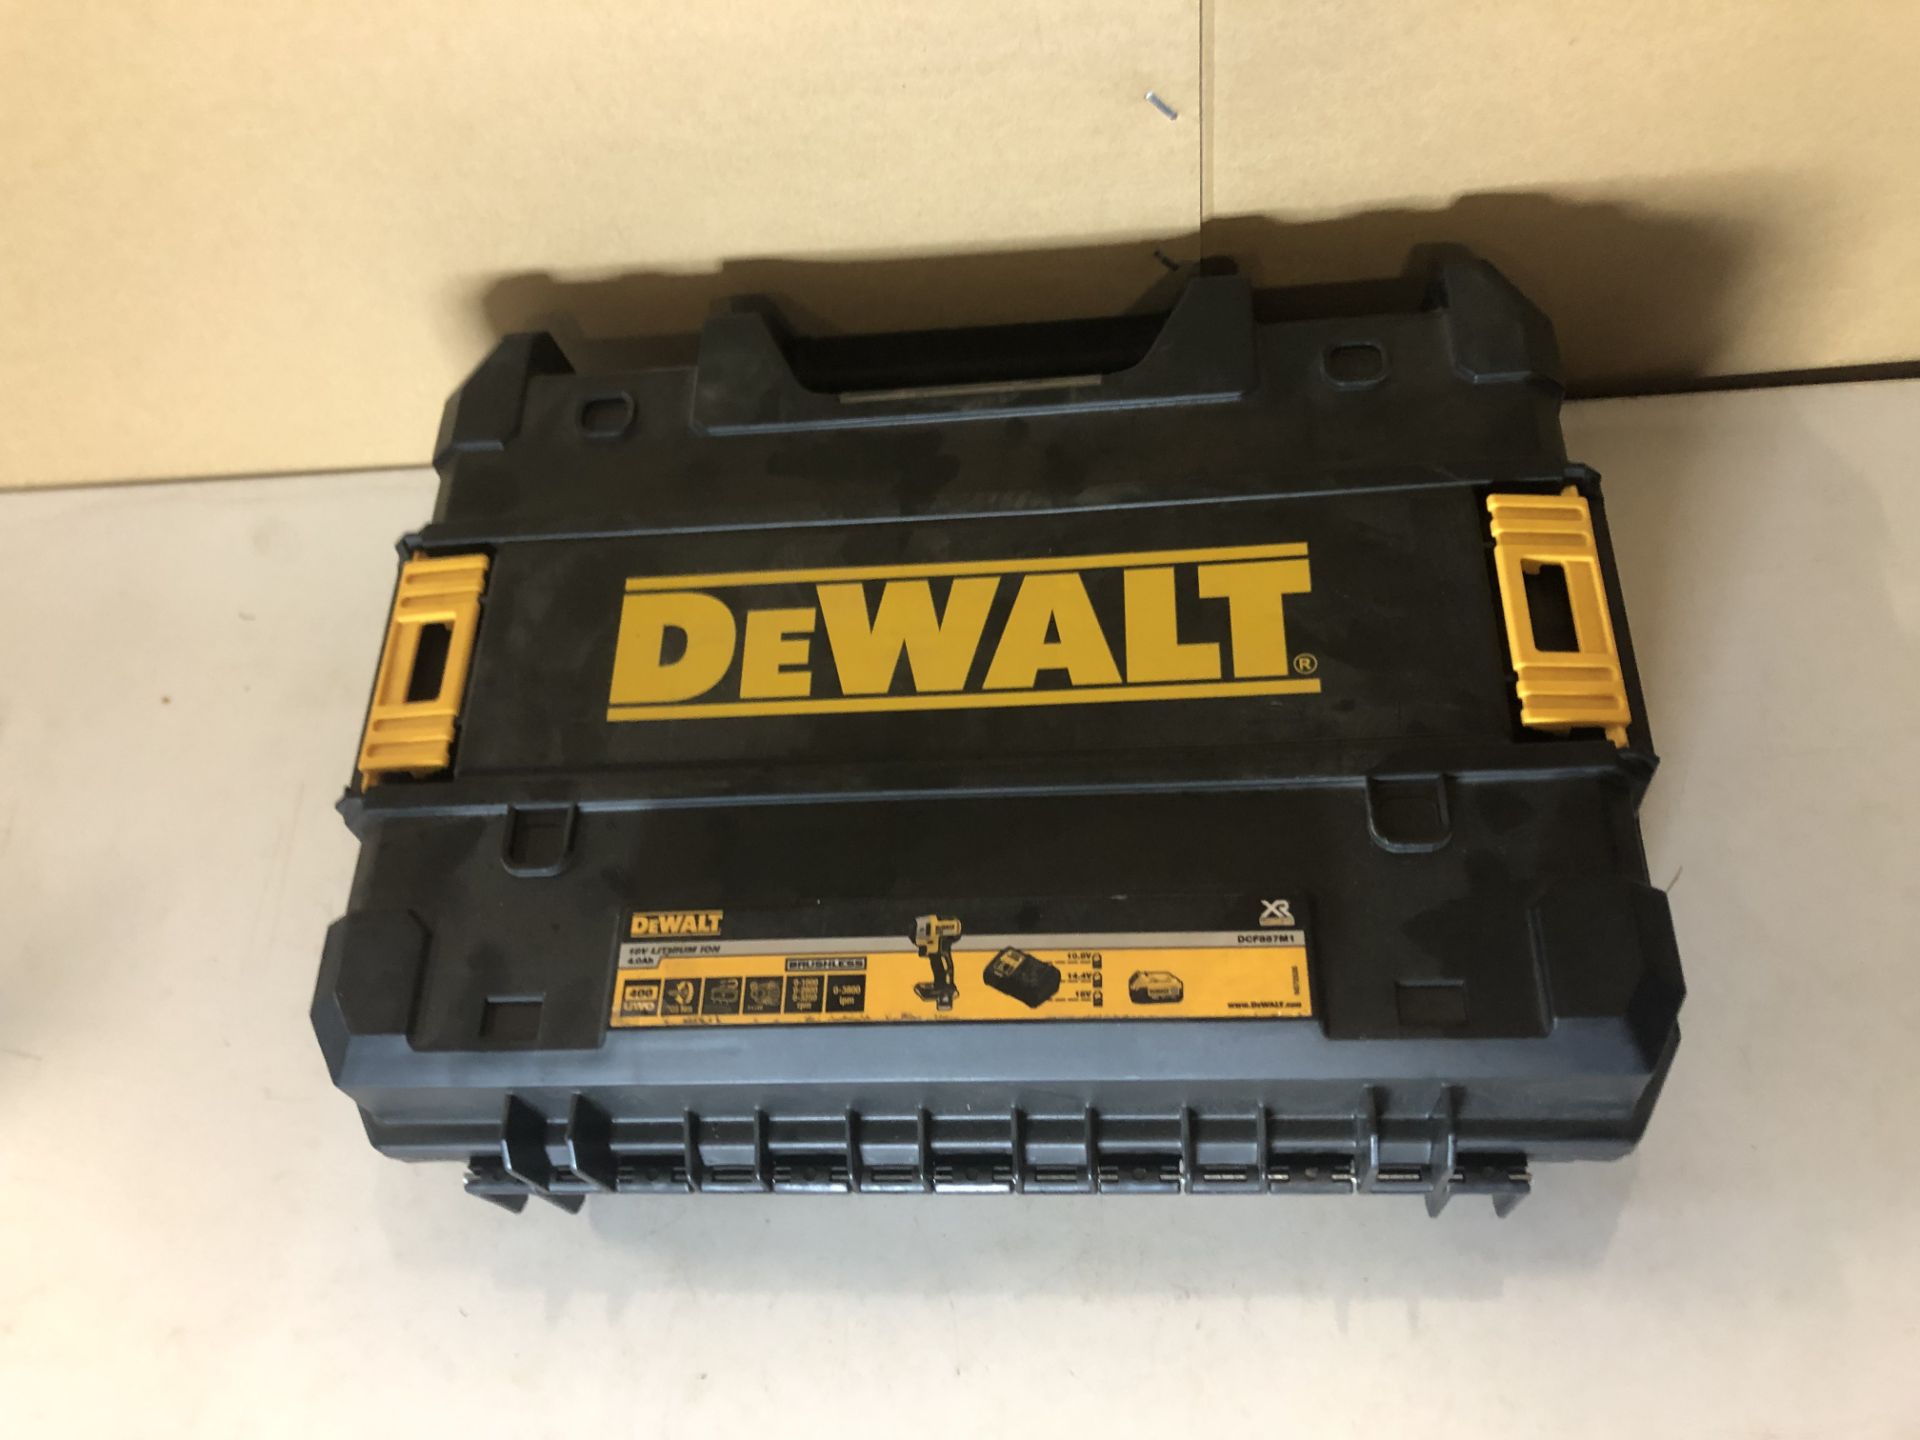 DeWalt DCF801D2 12v XR Brushless Impact Driver CASE ( IMPACT DRIVER NOT INCLUDED, JUST THE CASE! )